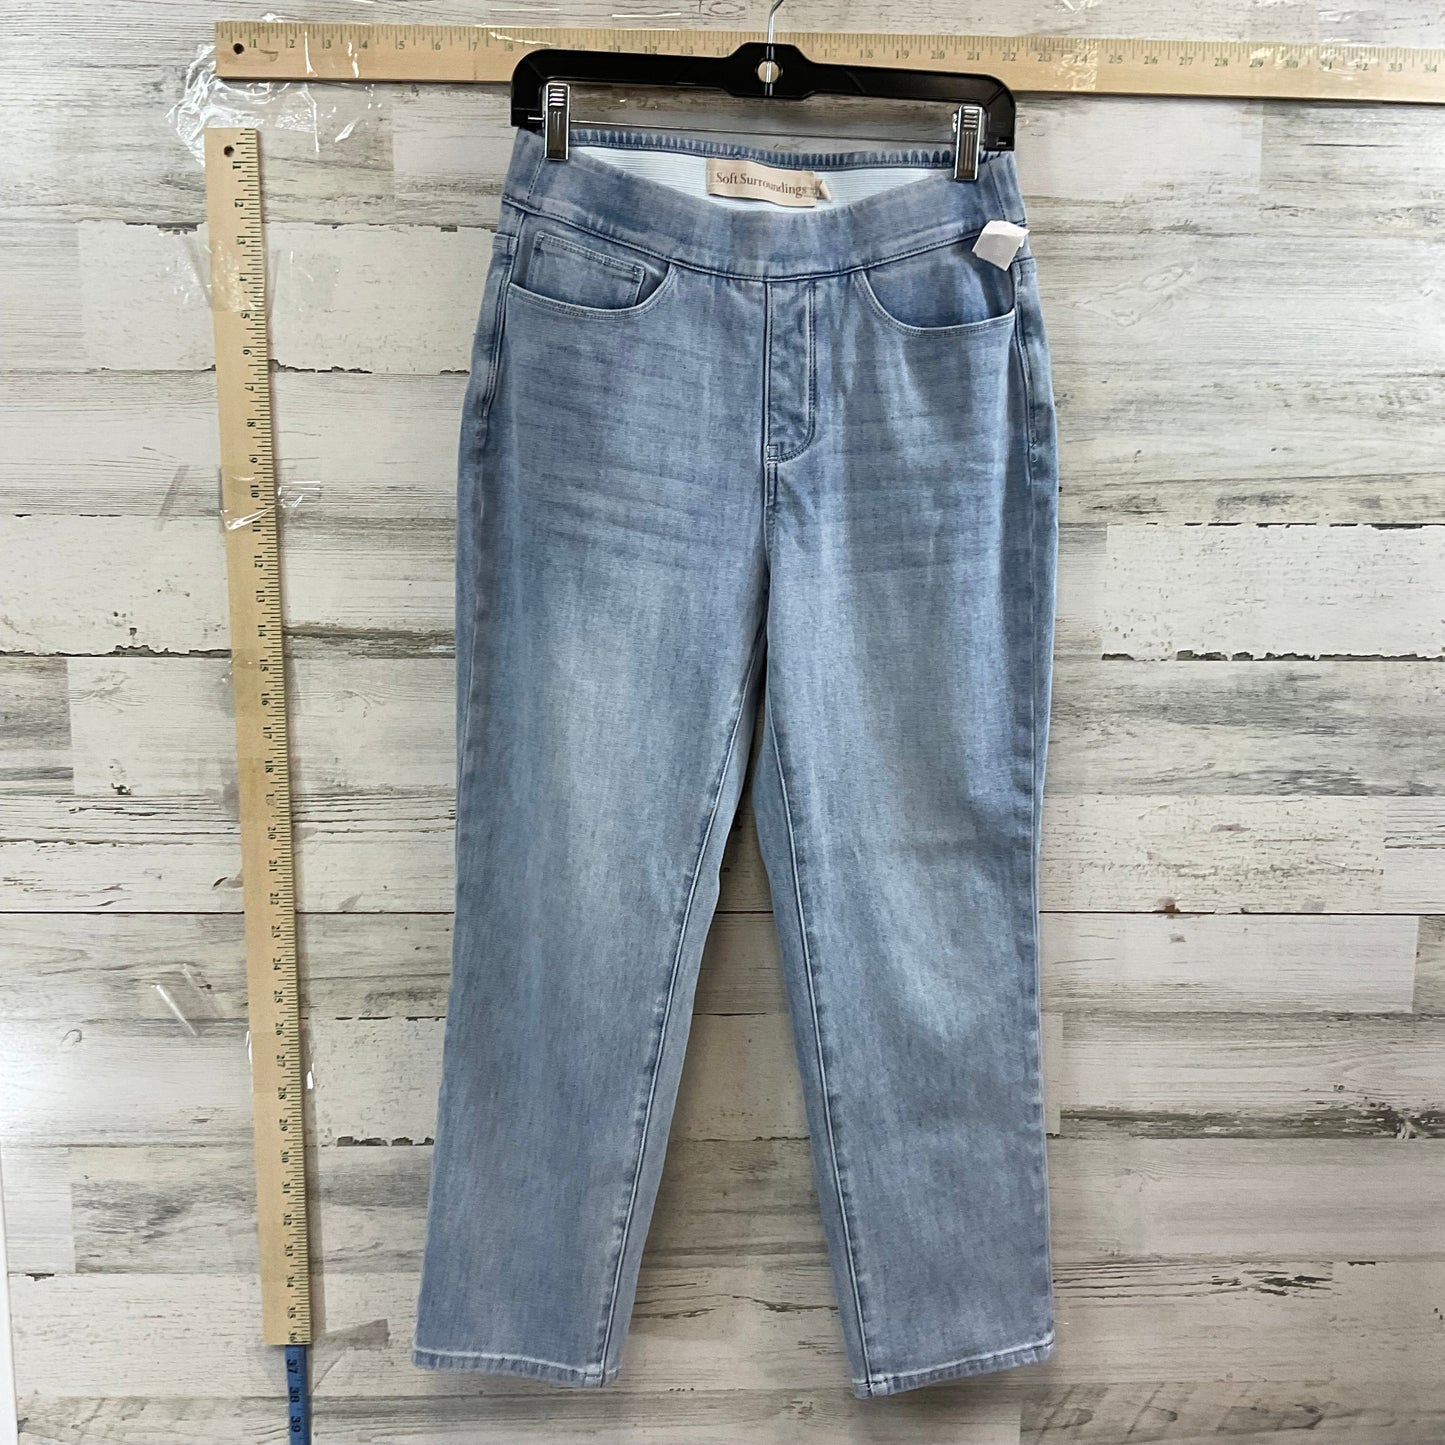 Jeans Straight By Soft Surroundings  Size: S